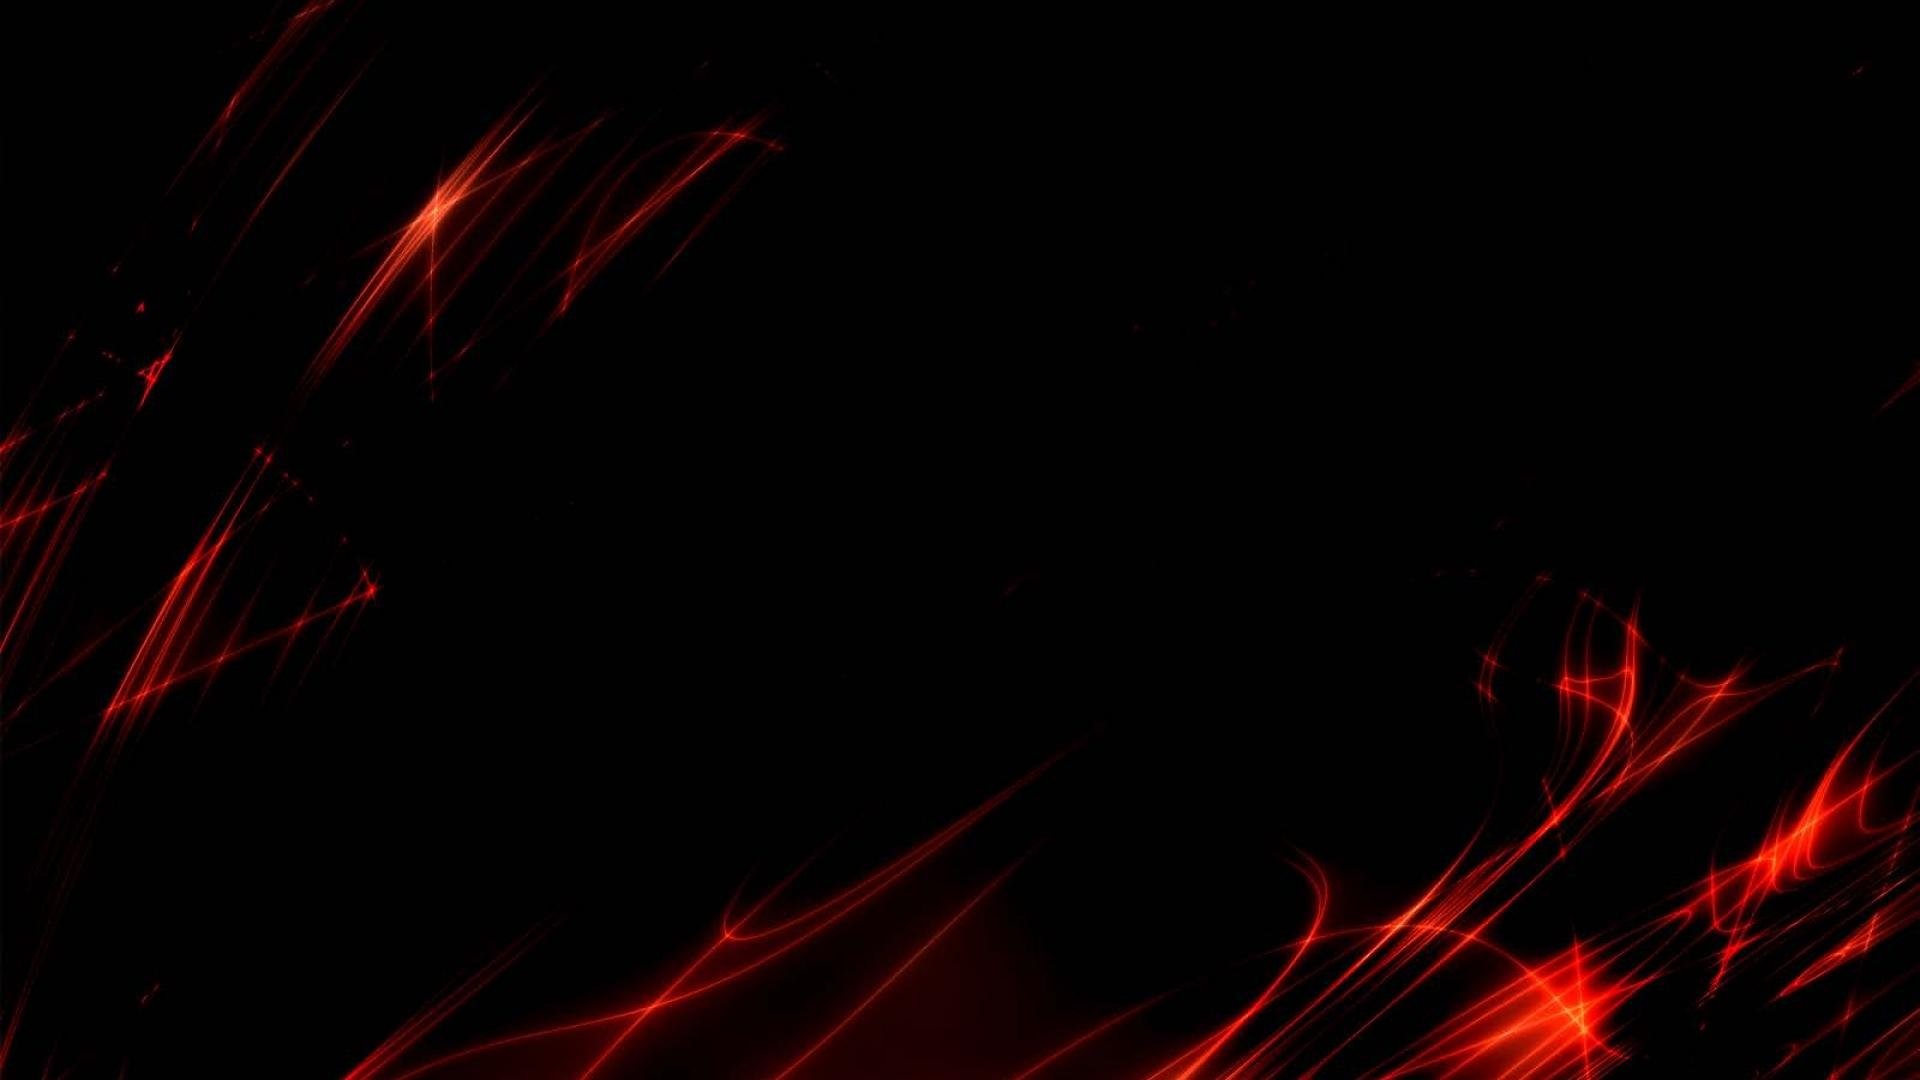 Dark Red Abstract Wallpaper, Dark Red Abstract Pics for